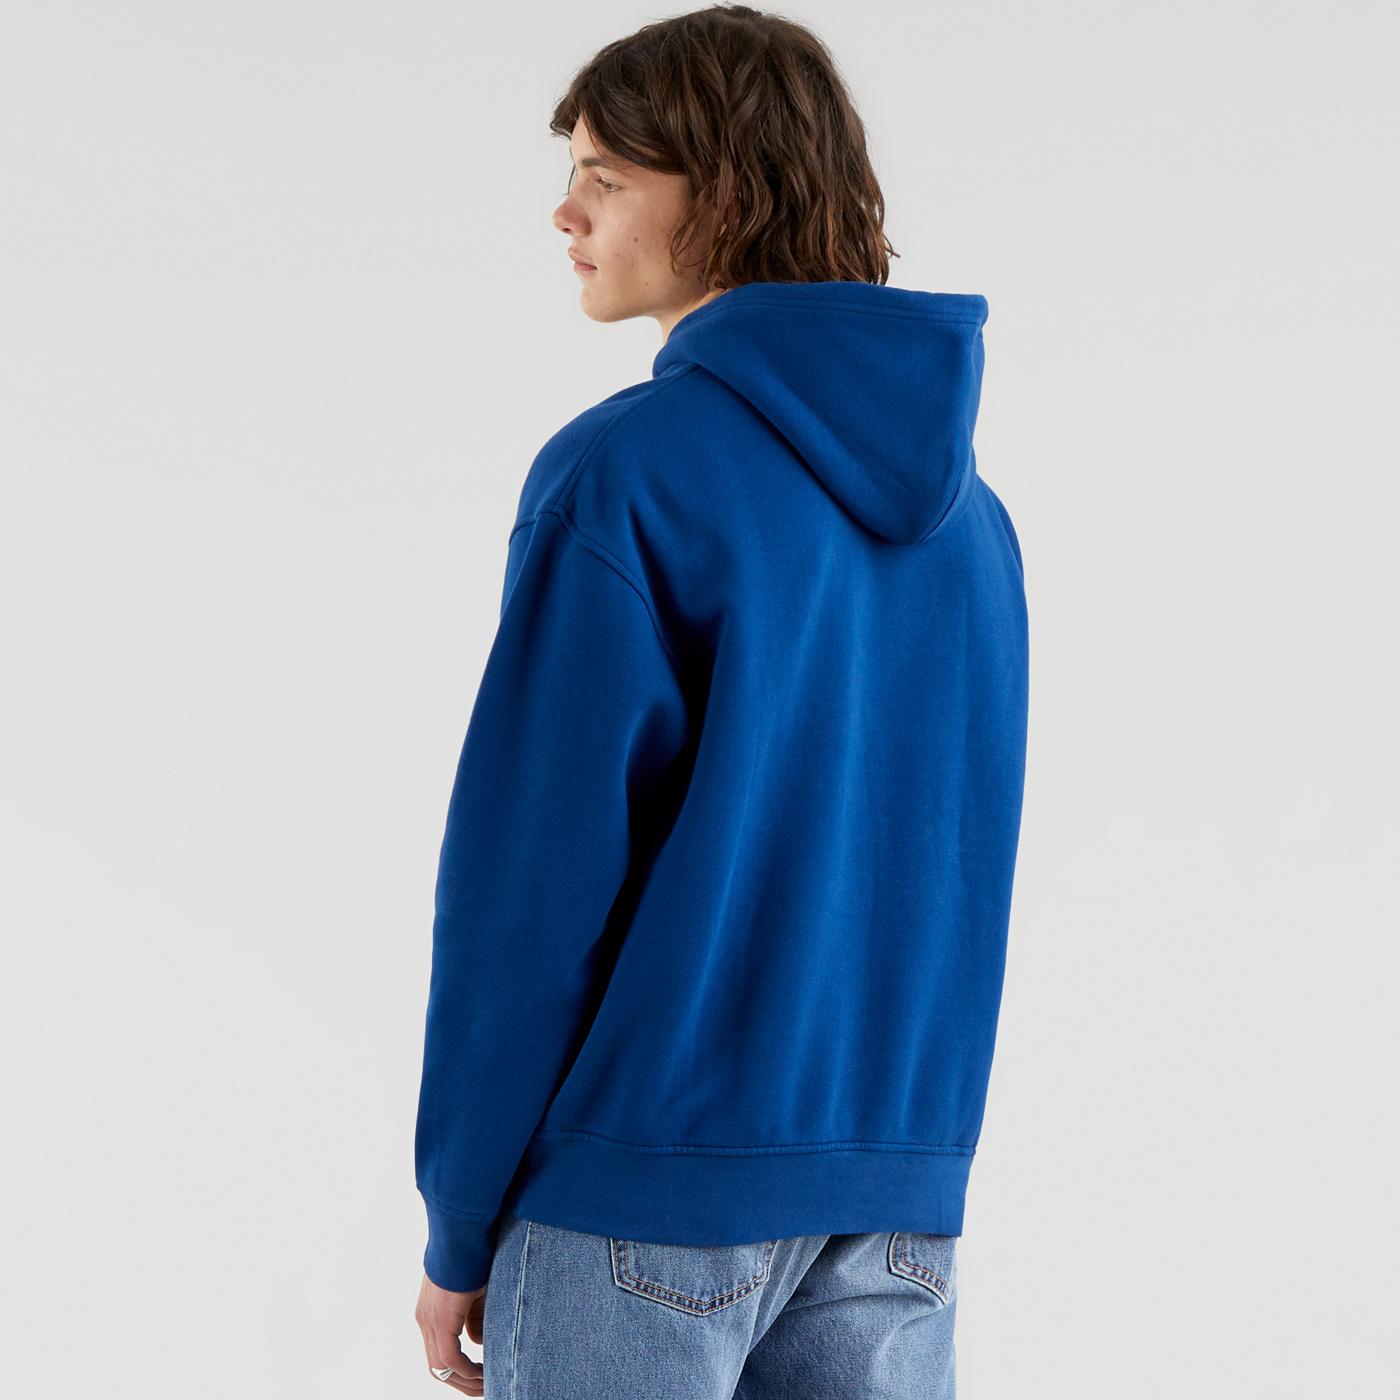 LEVI'S T2 Relaxed Modern Vintage Logo Hoodie in Navy Peony